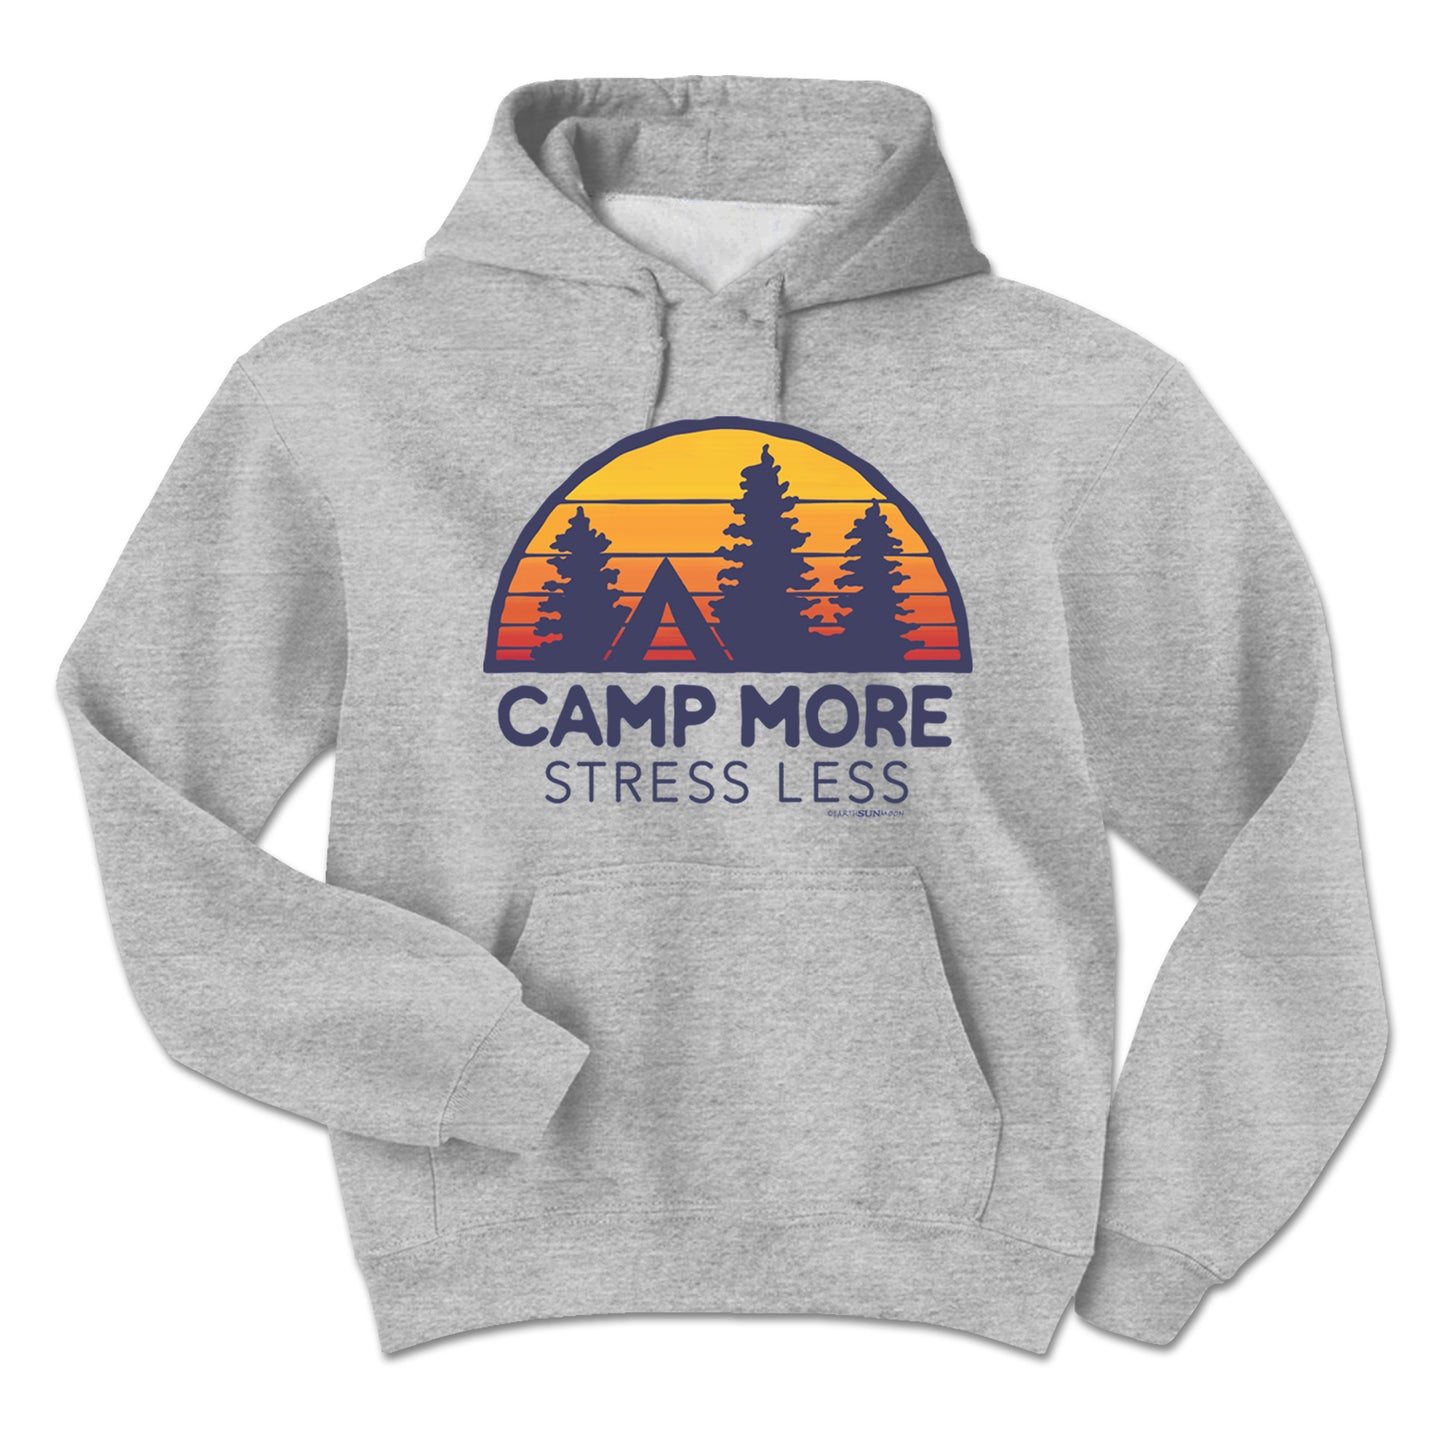 Camp More Stress Less Adult Hoodie